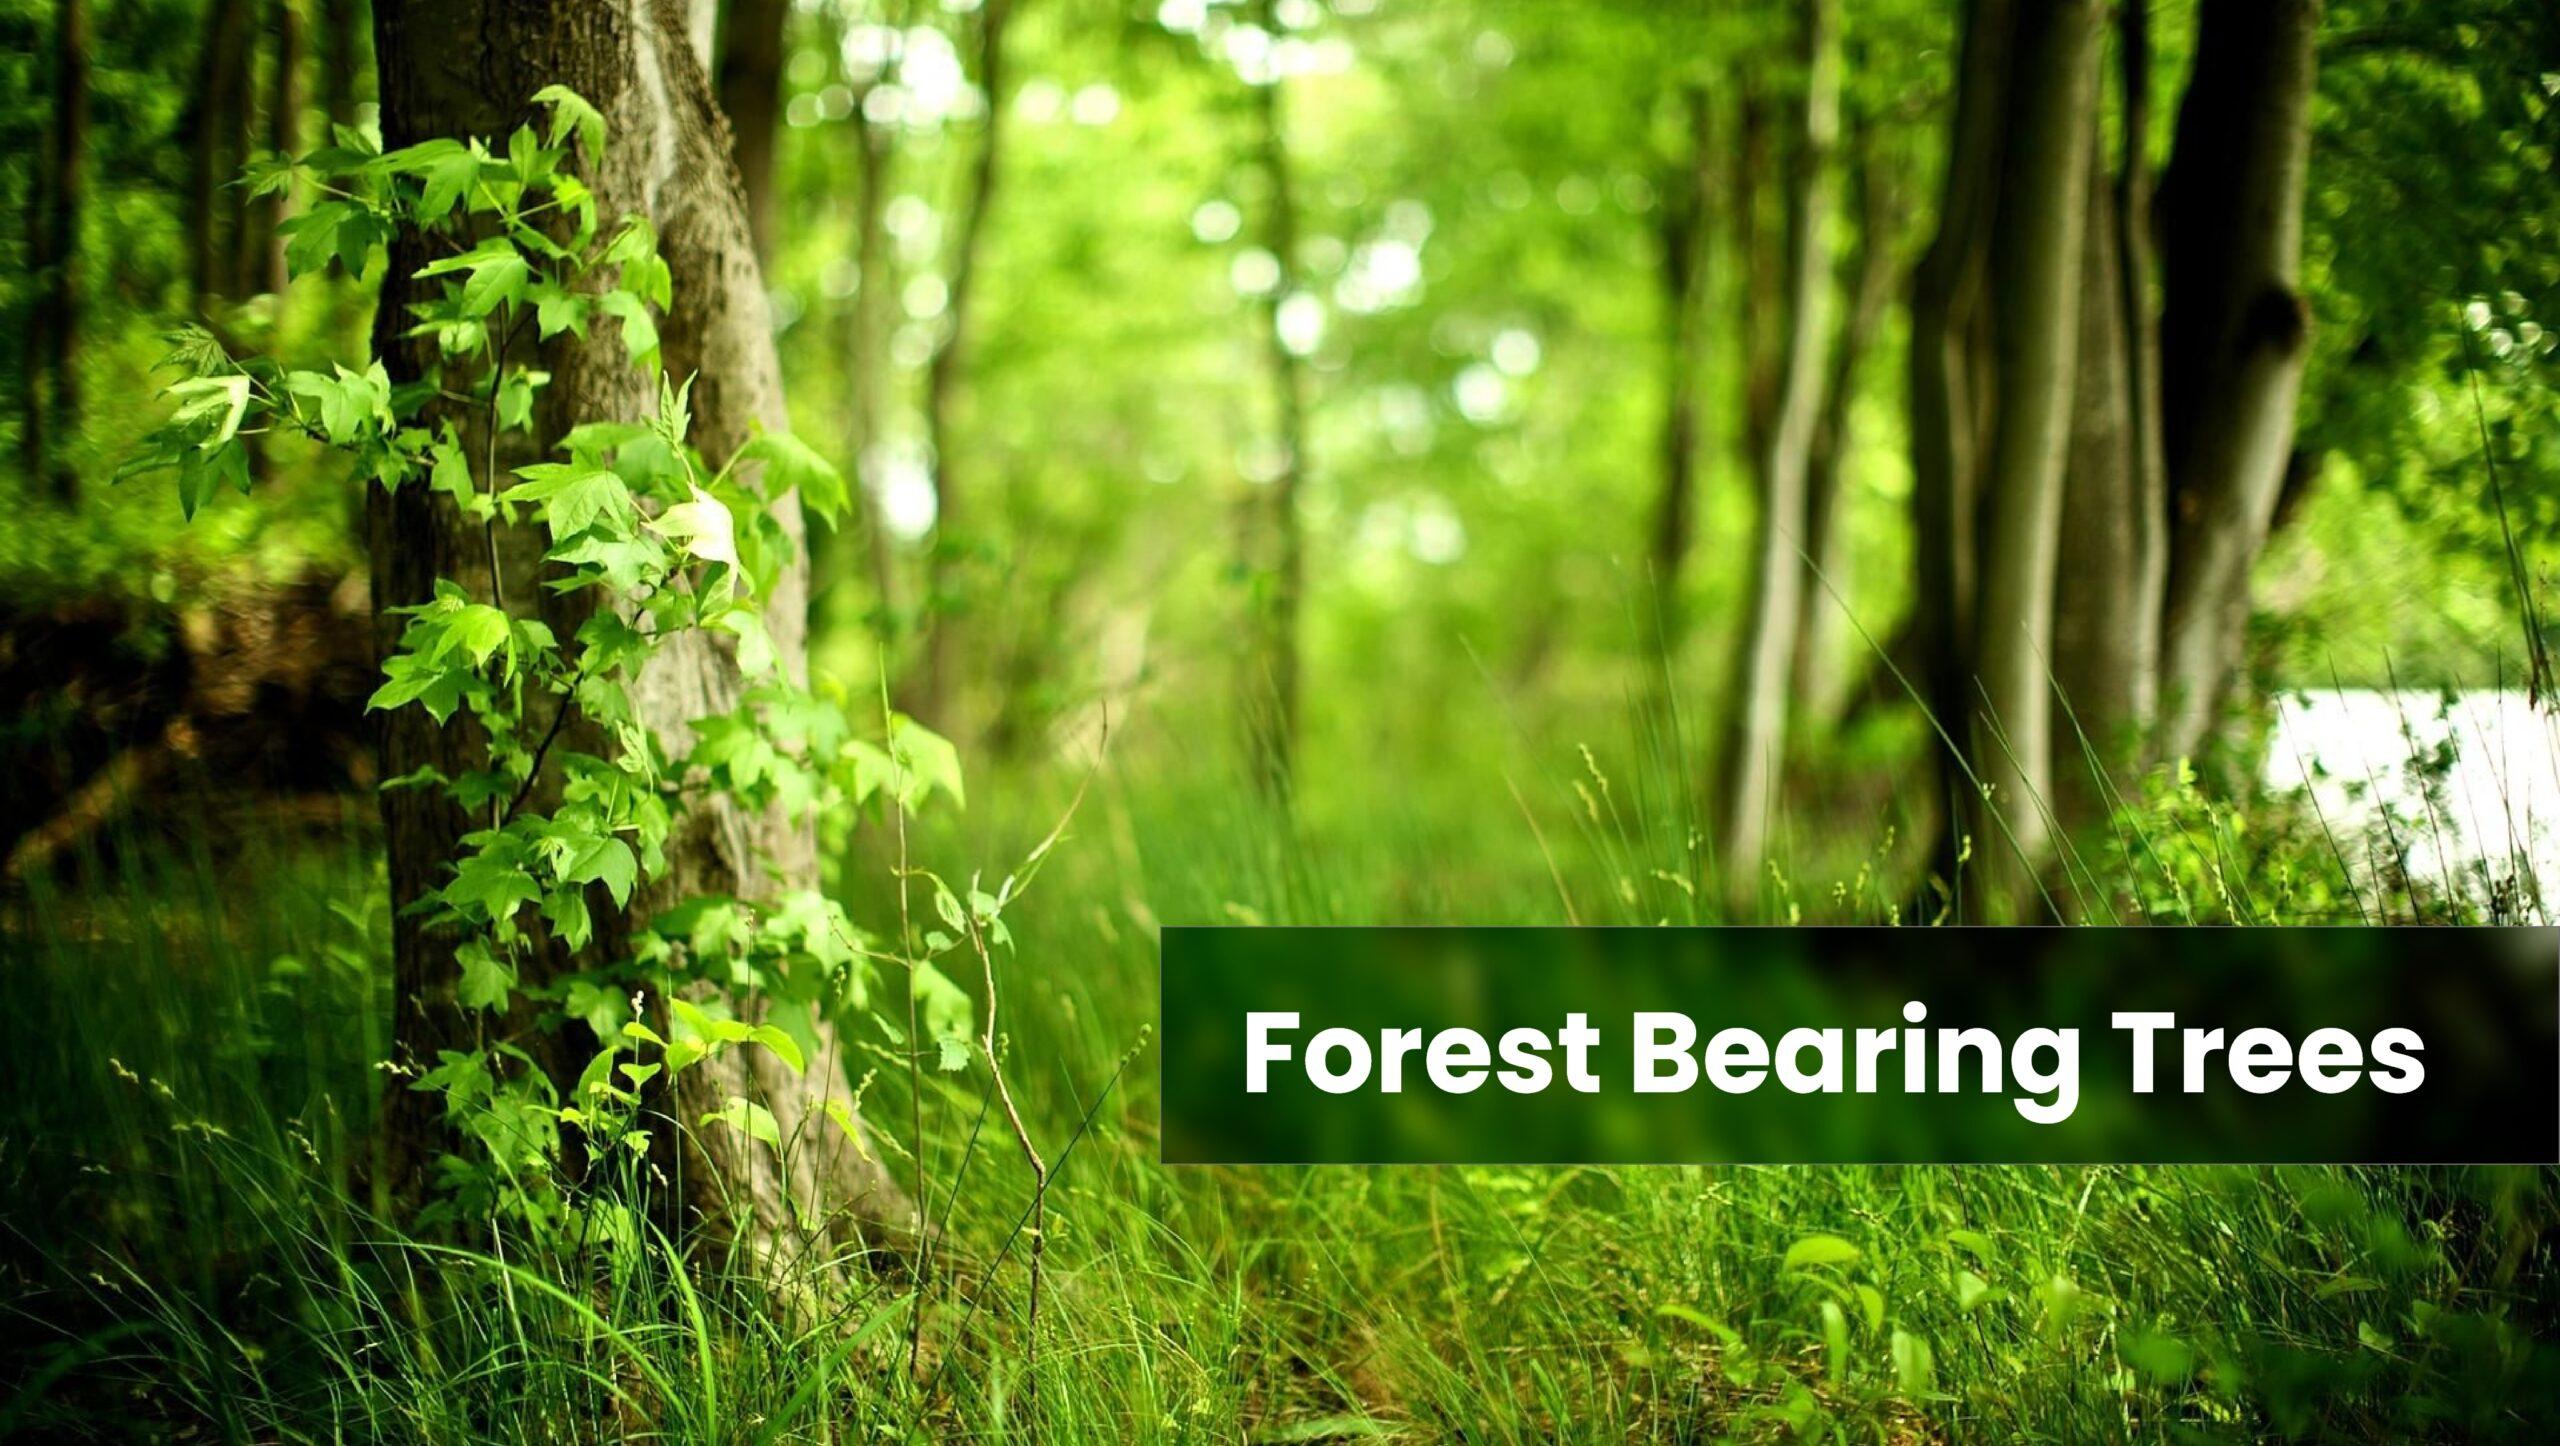 Benefits of growing forest bearing trees in farms